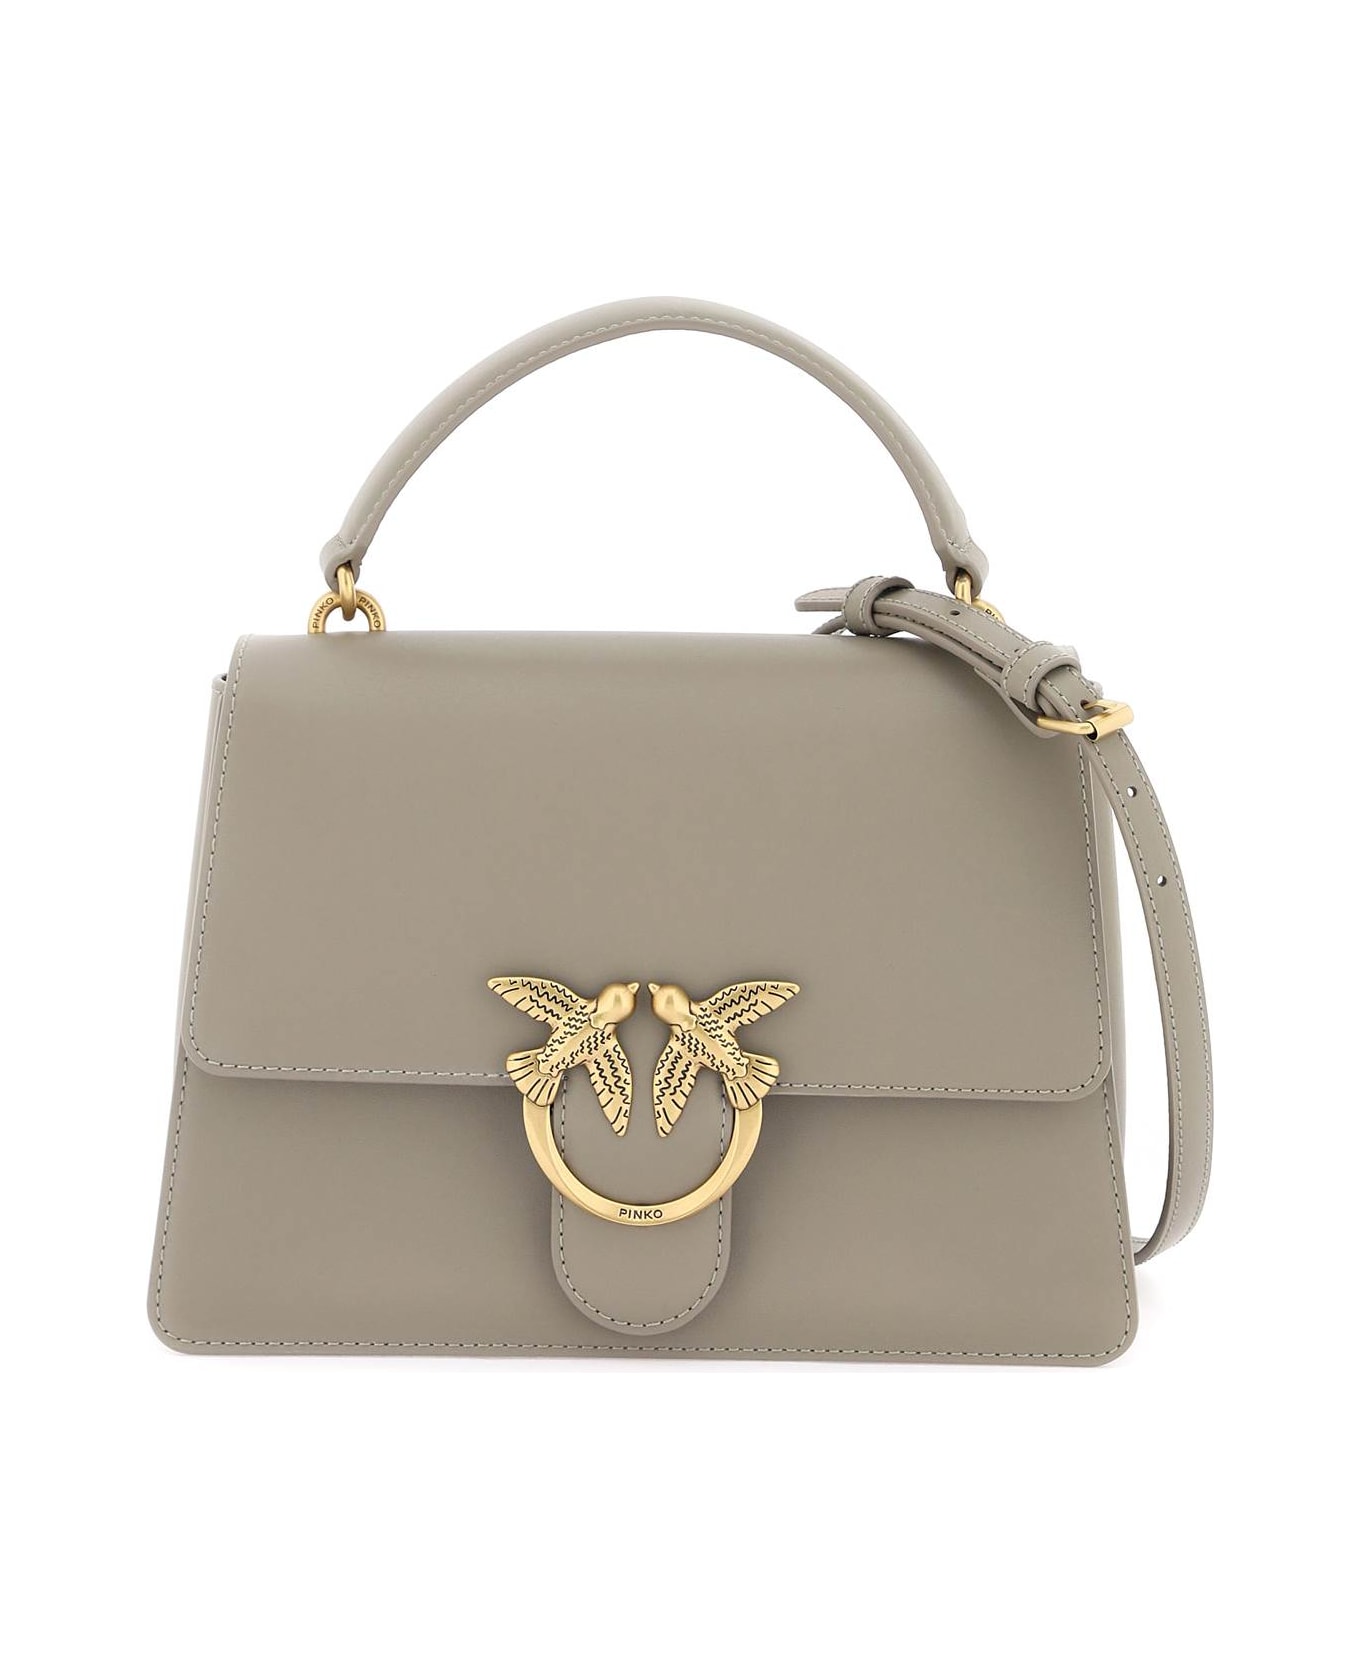 Pinko Love One Top Handle Classic Light Bag - NOCE ANTIQUE GOLD (Grey)